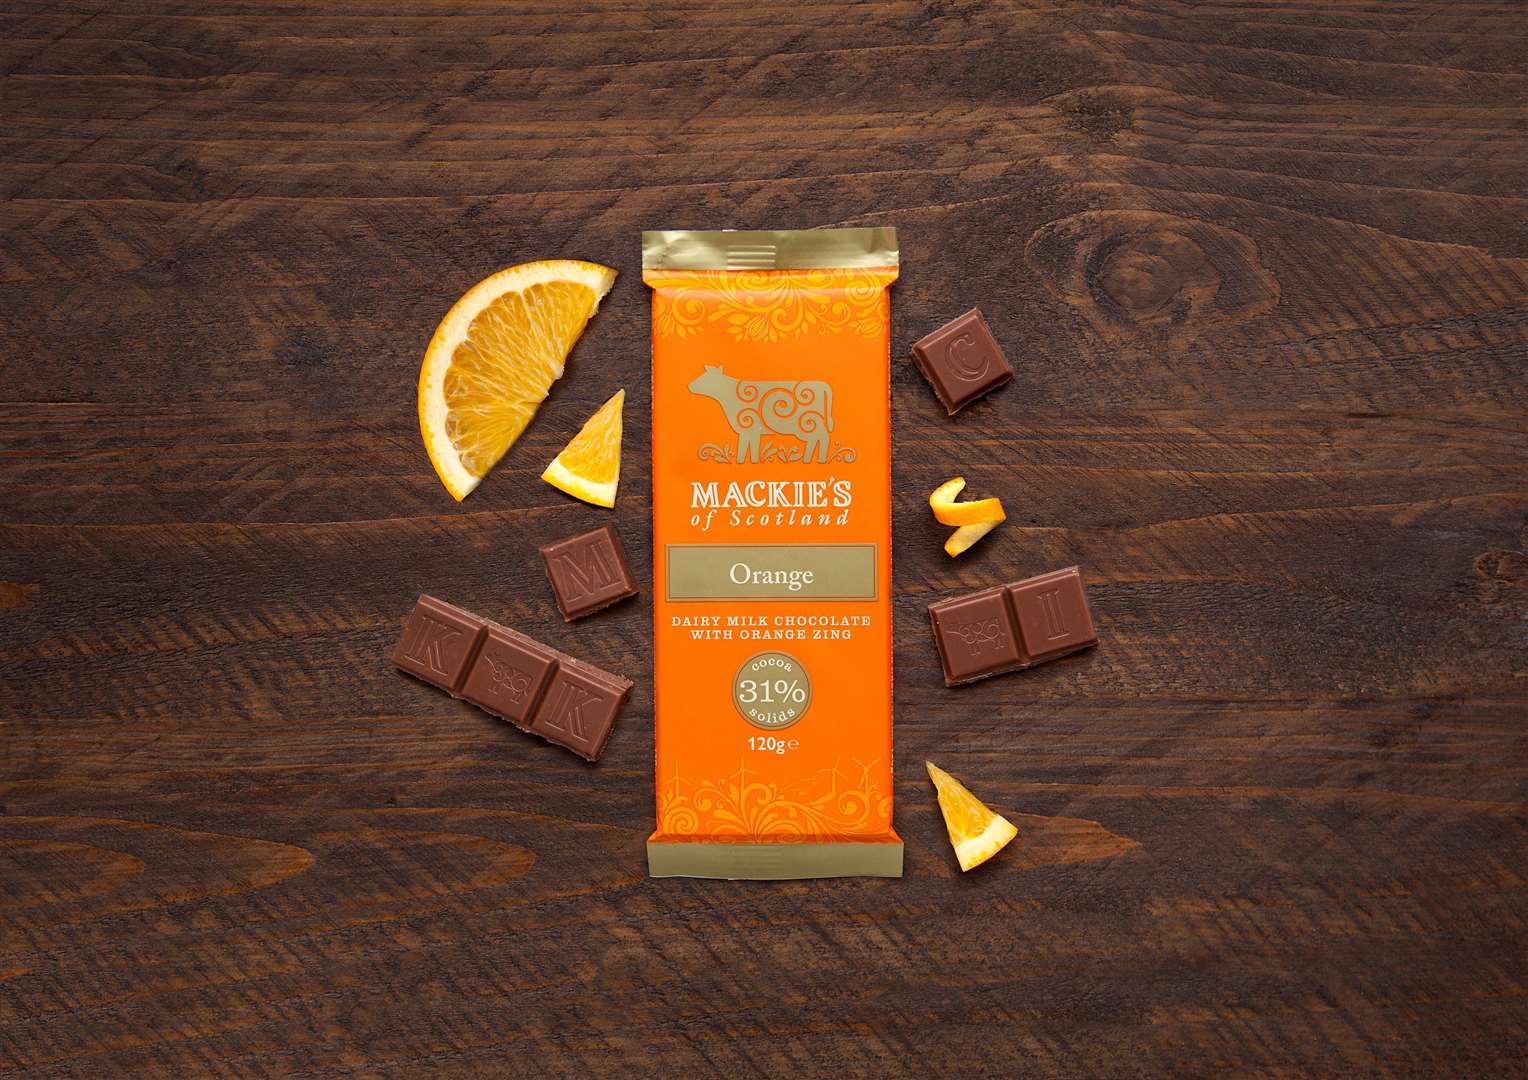 Mackies has launched a new addition to its line of locally produced chocolate.